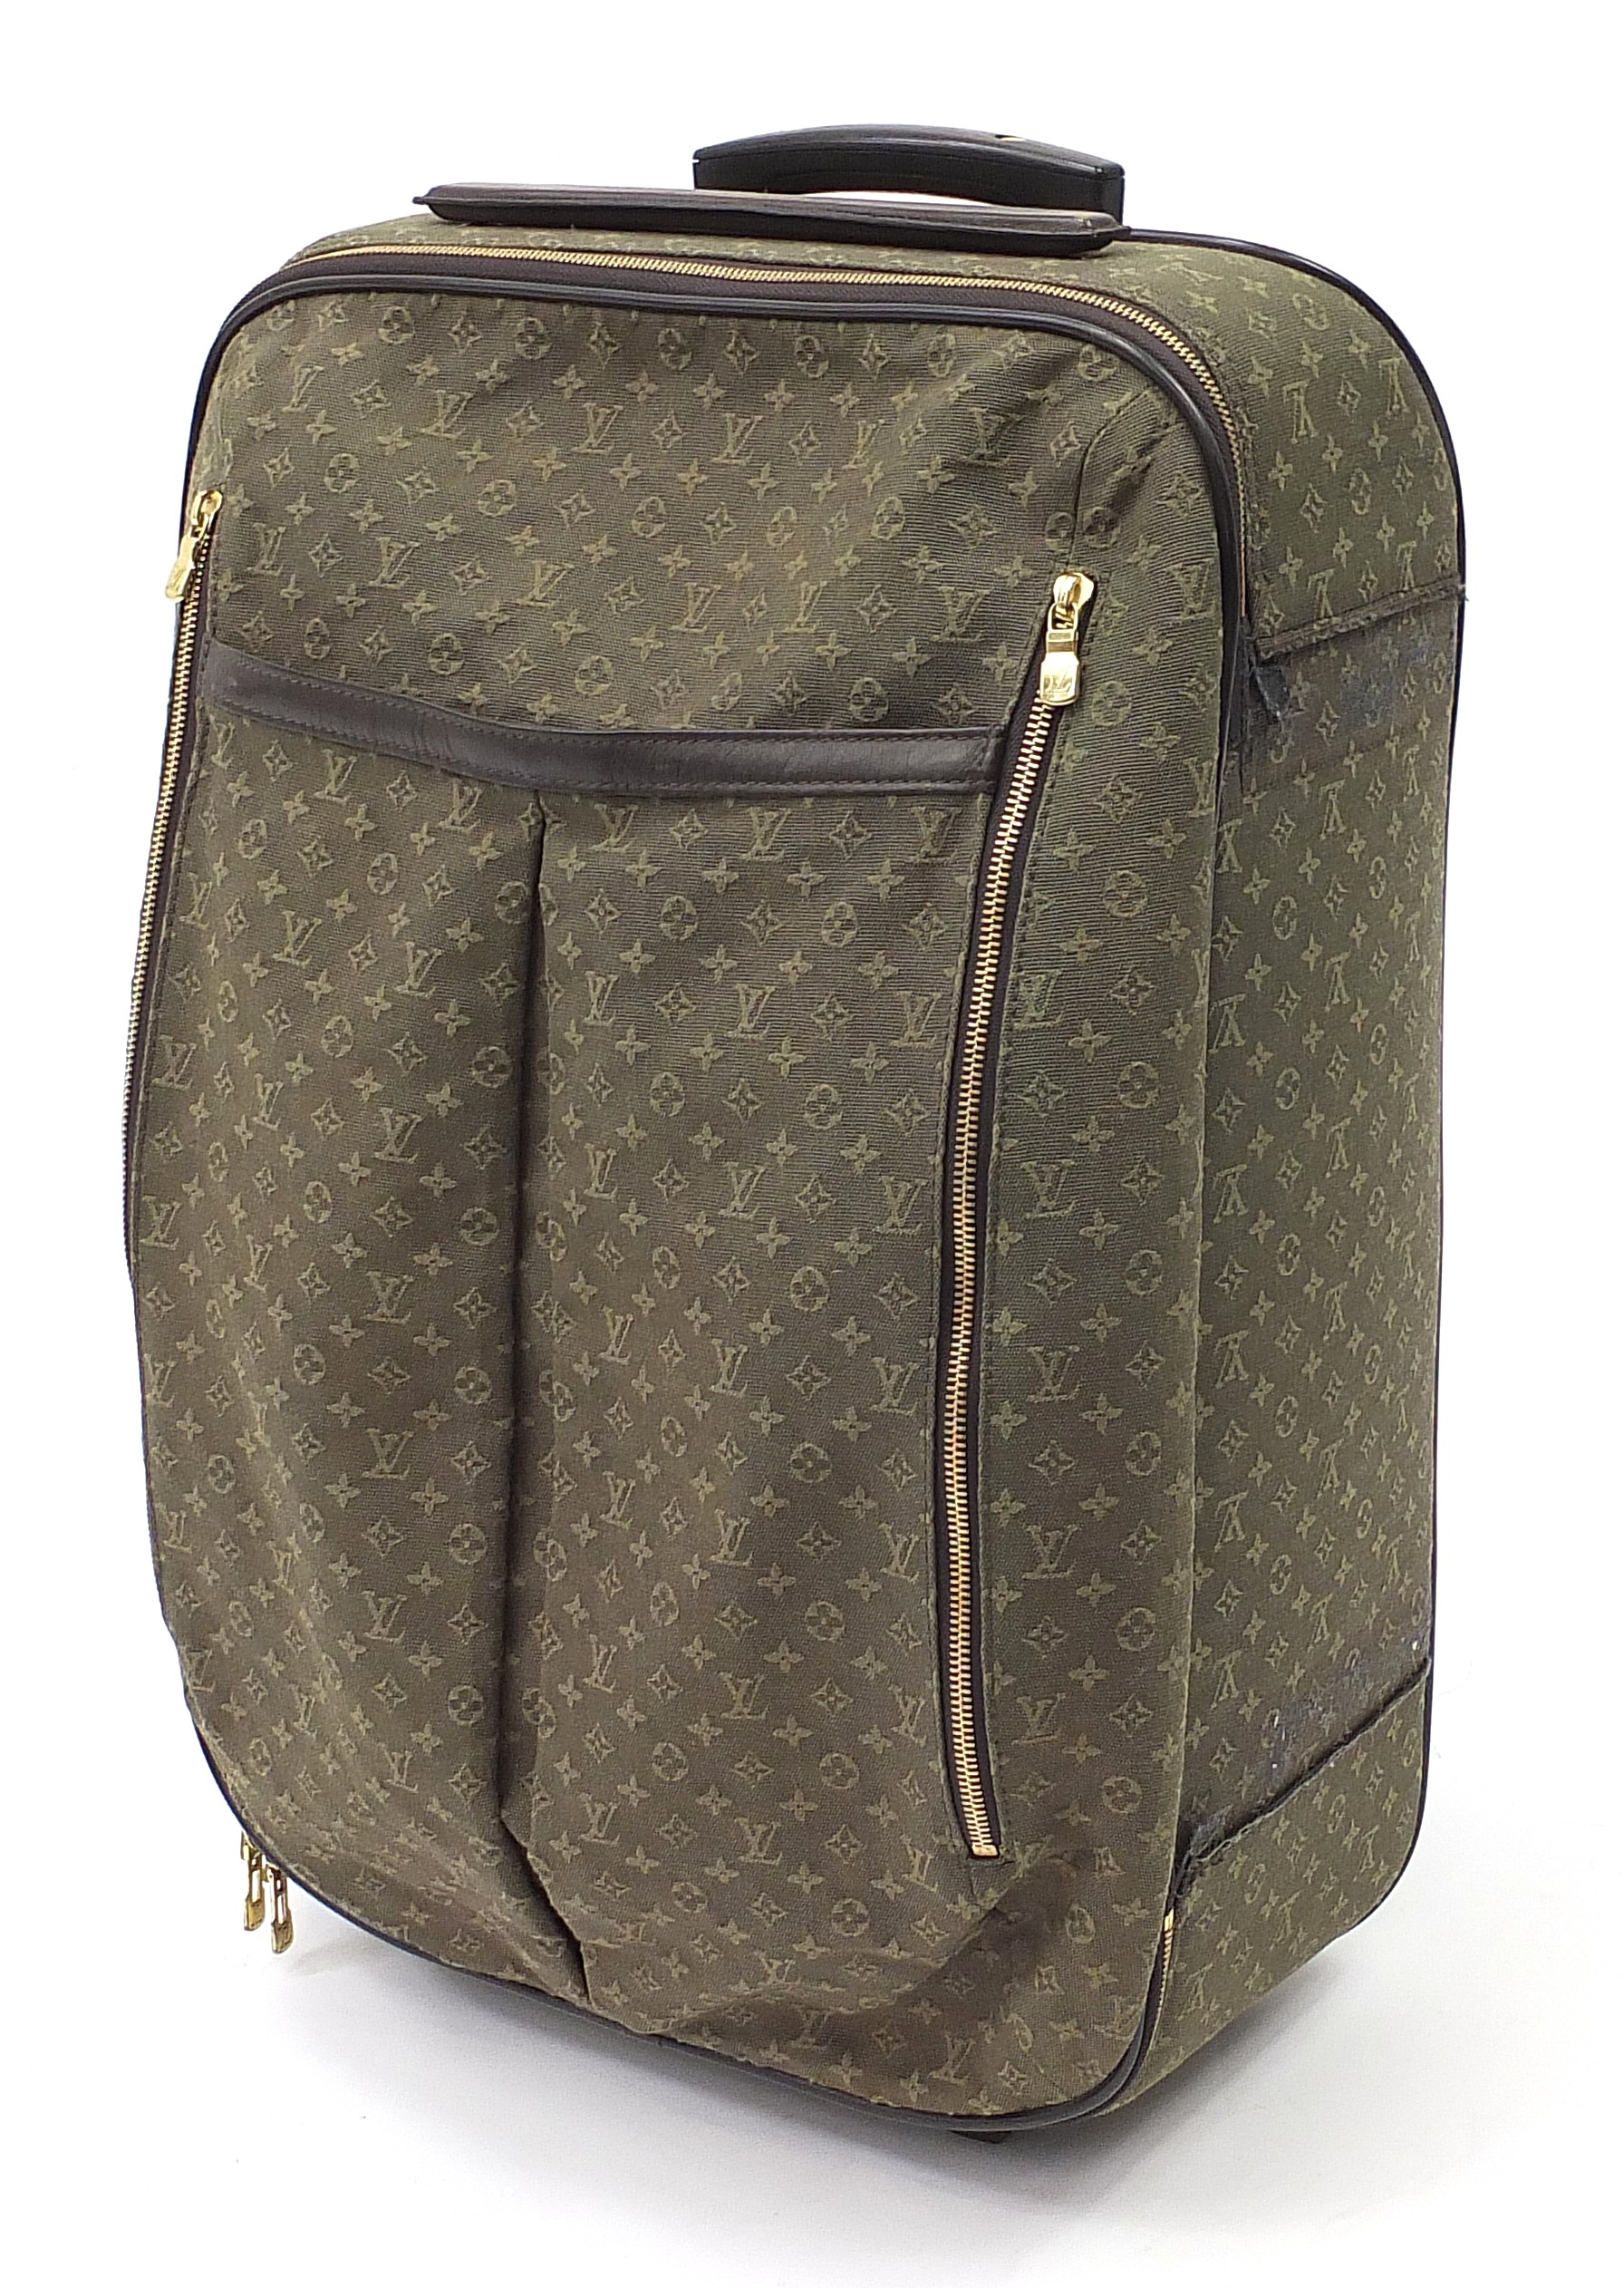 Louis Vuitton Pegase green monogrammed canvas trolley travel suitcase, serial number SP0062, 57cm